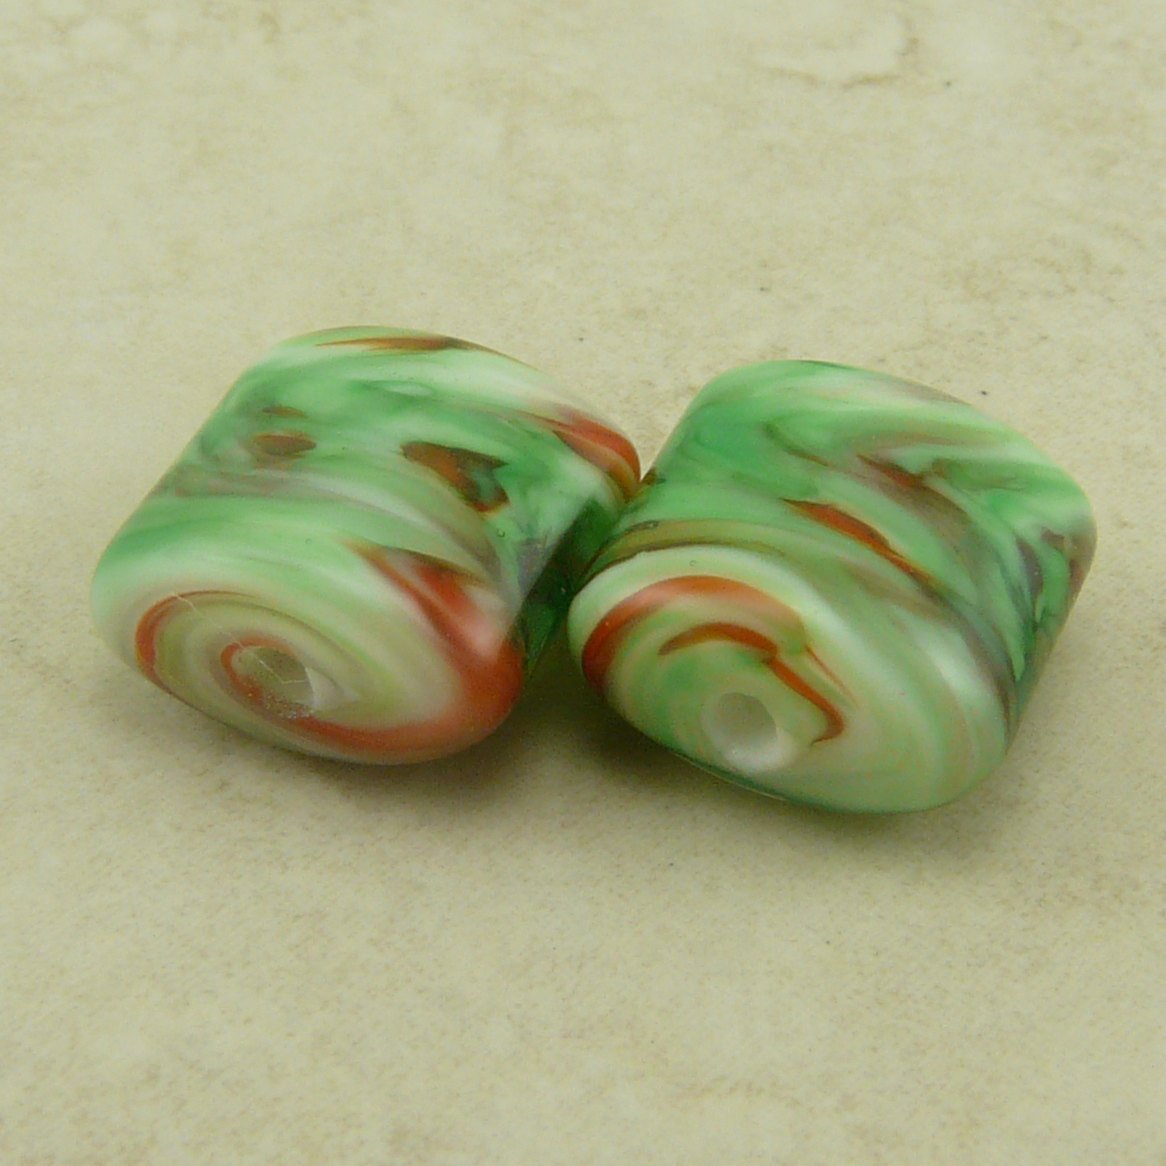 Christmas Holiday Colors Green Red White - Lampwork Bead Pair by Dragynsfyre Designs - SRA